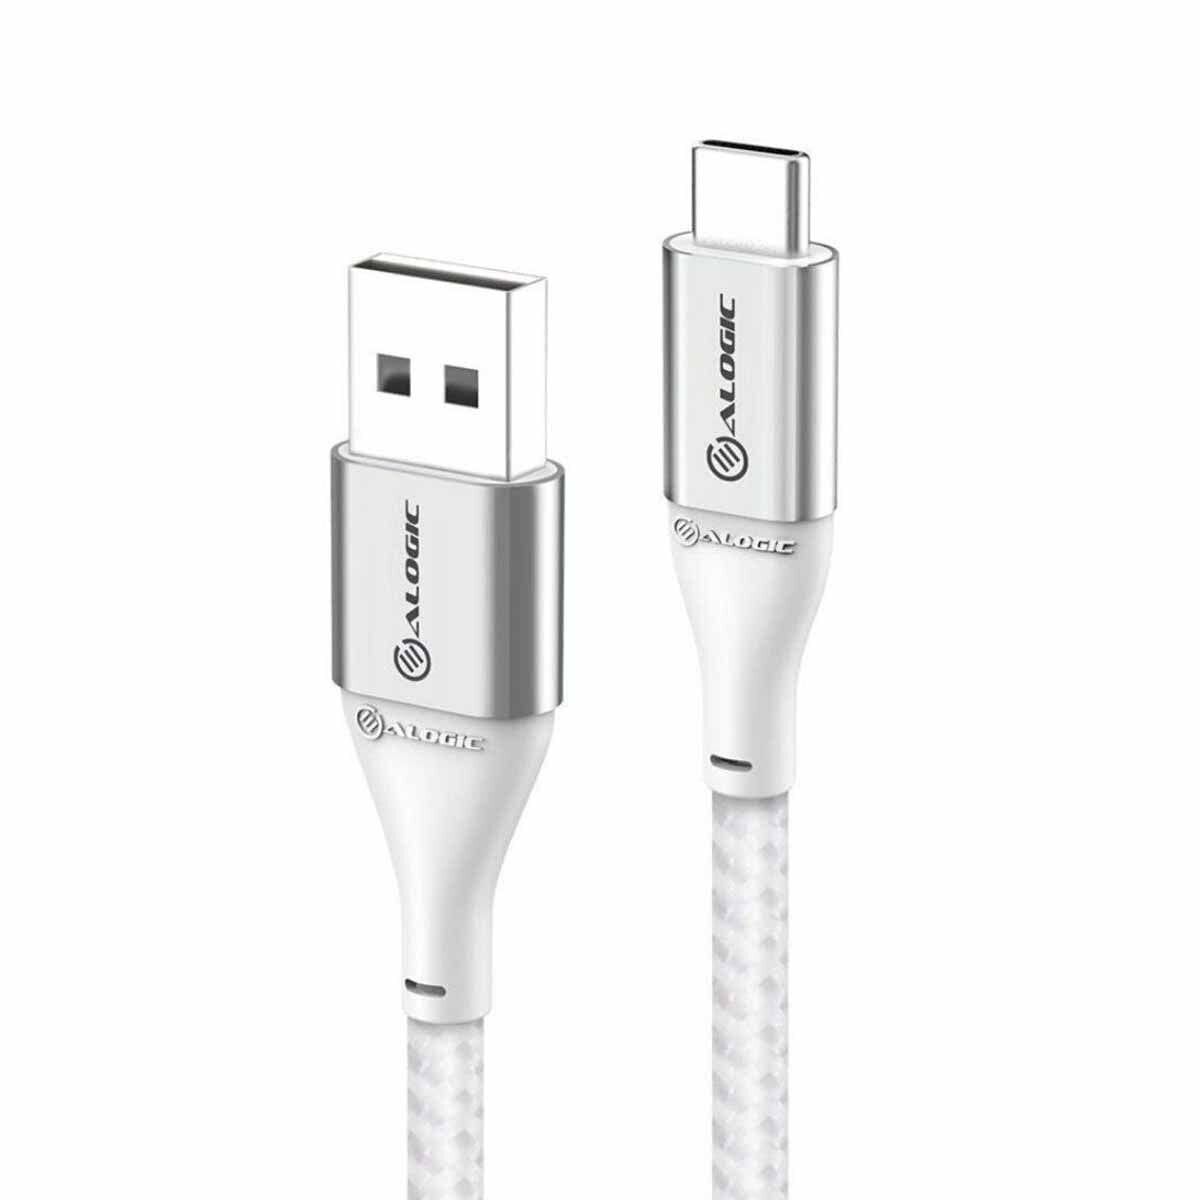 ALOGIC Super Ultra USB 2.0 USB-C to USB-A Cable - 3A/480Mbps (3 M, Silver) 3 M S